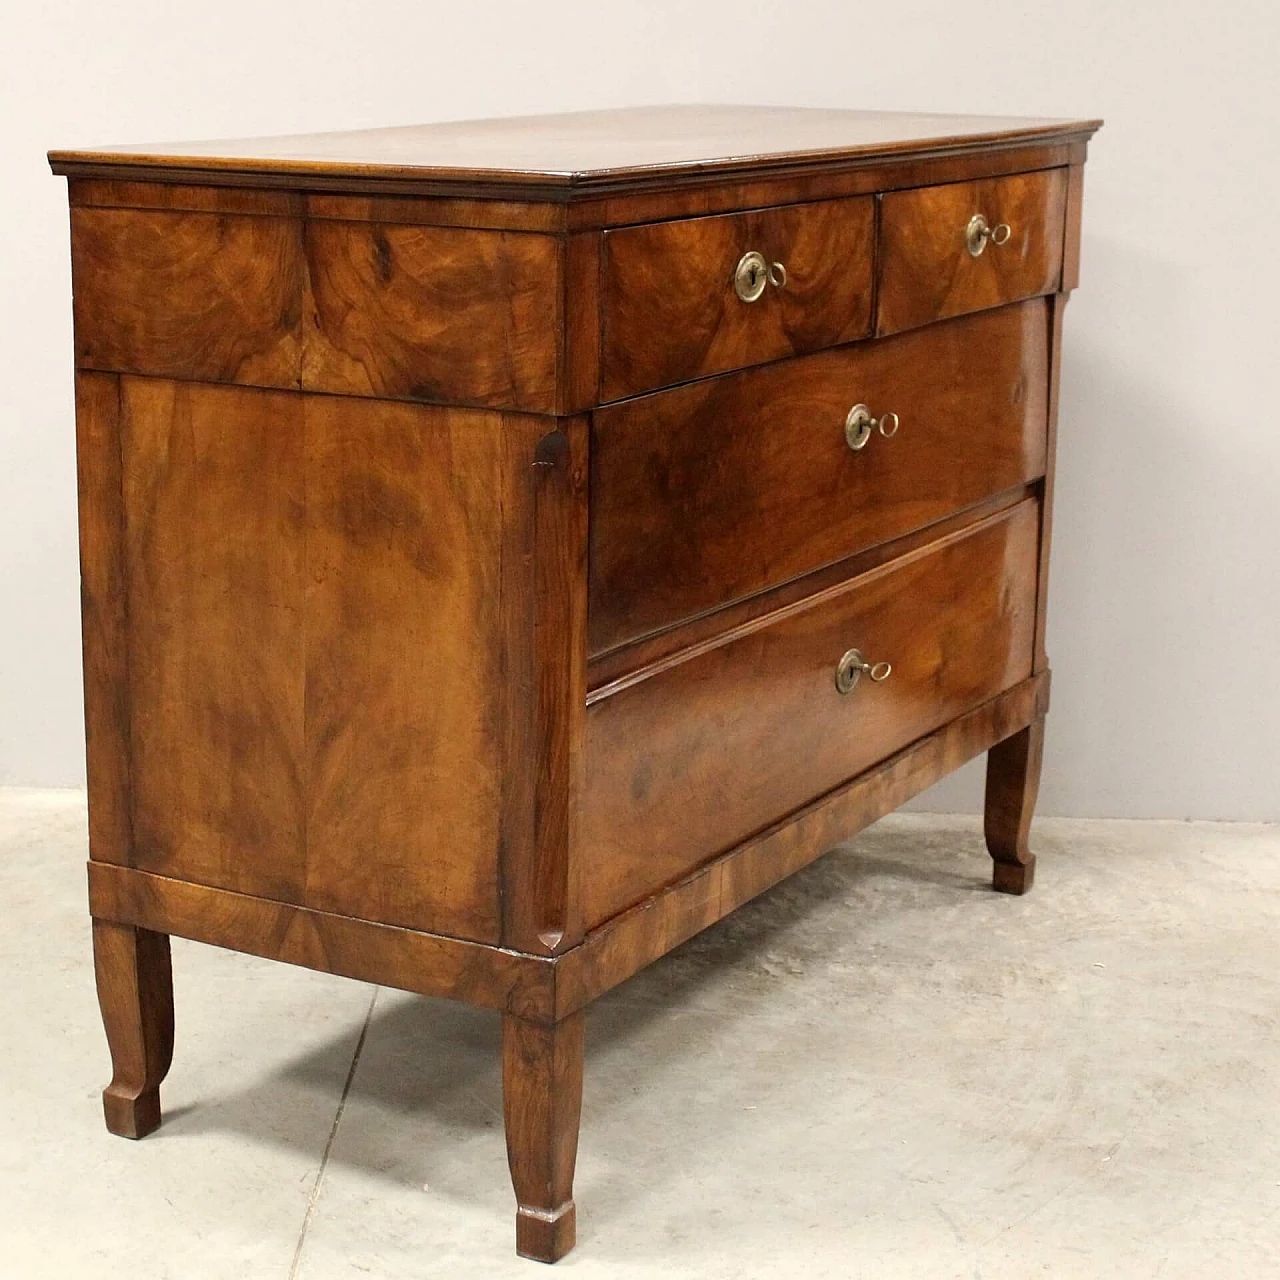 Direttorio chest of drawers in solid walnut and walnut panelling, second half of the 18th century 8